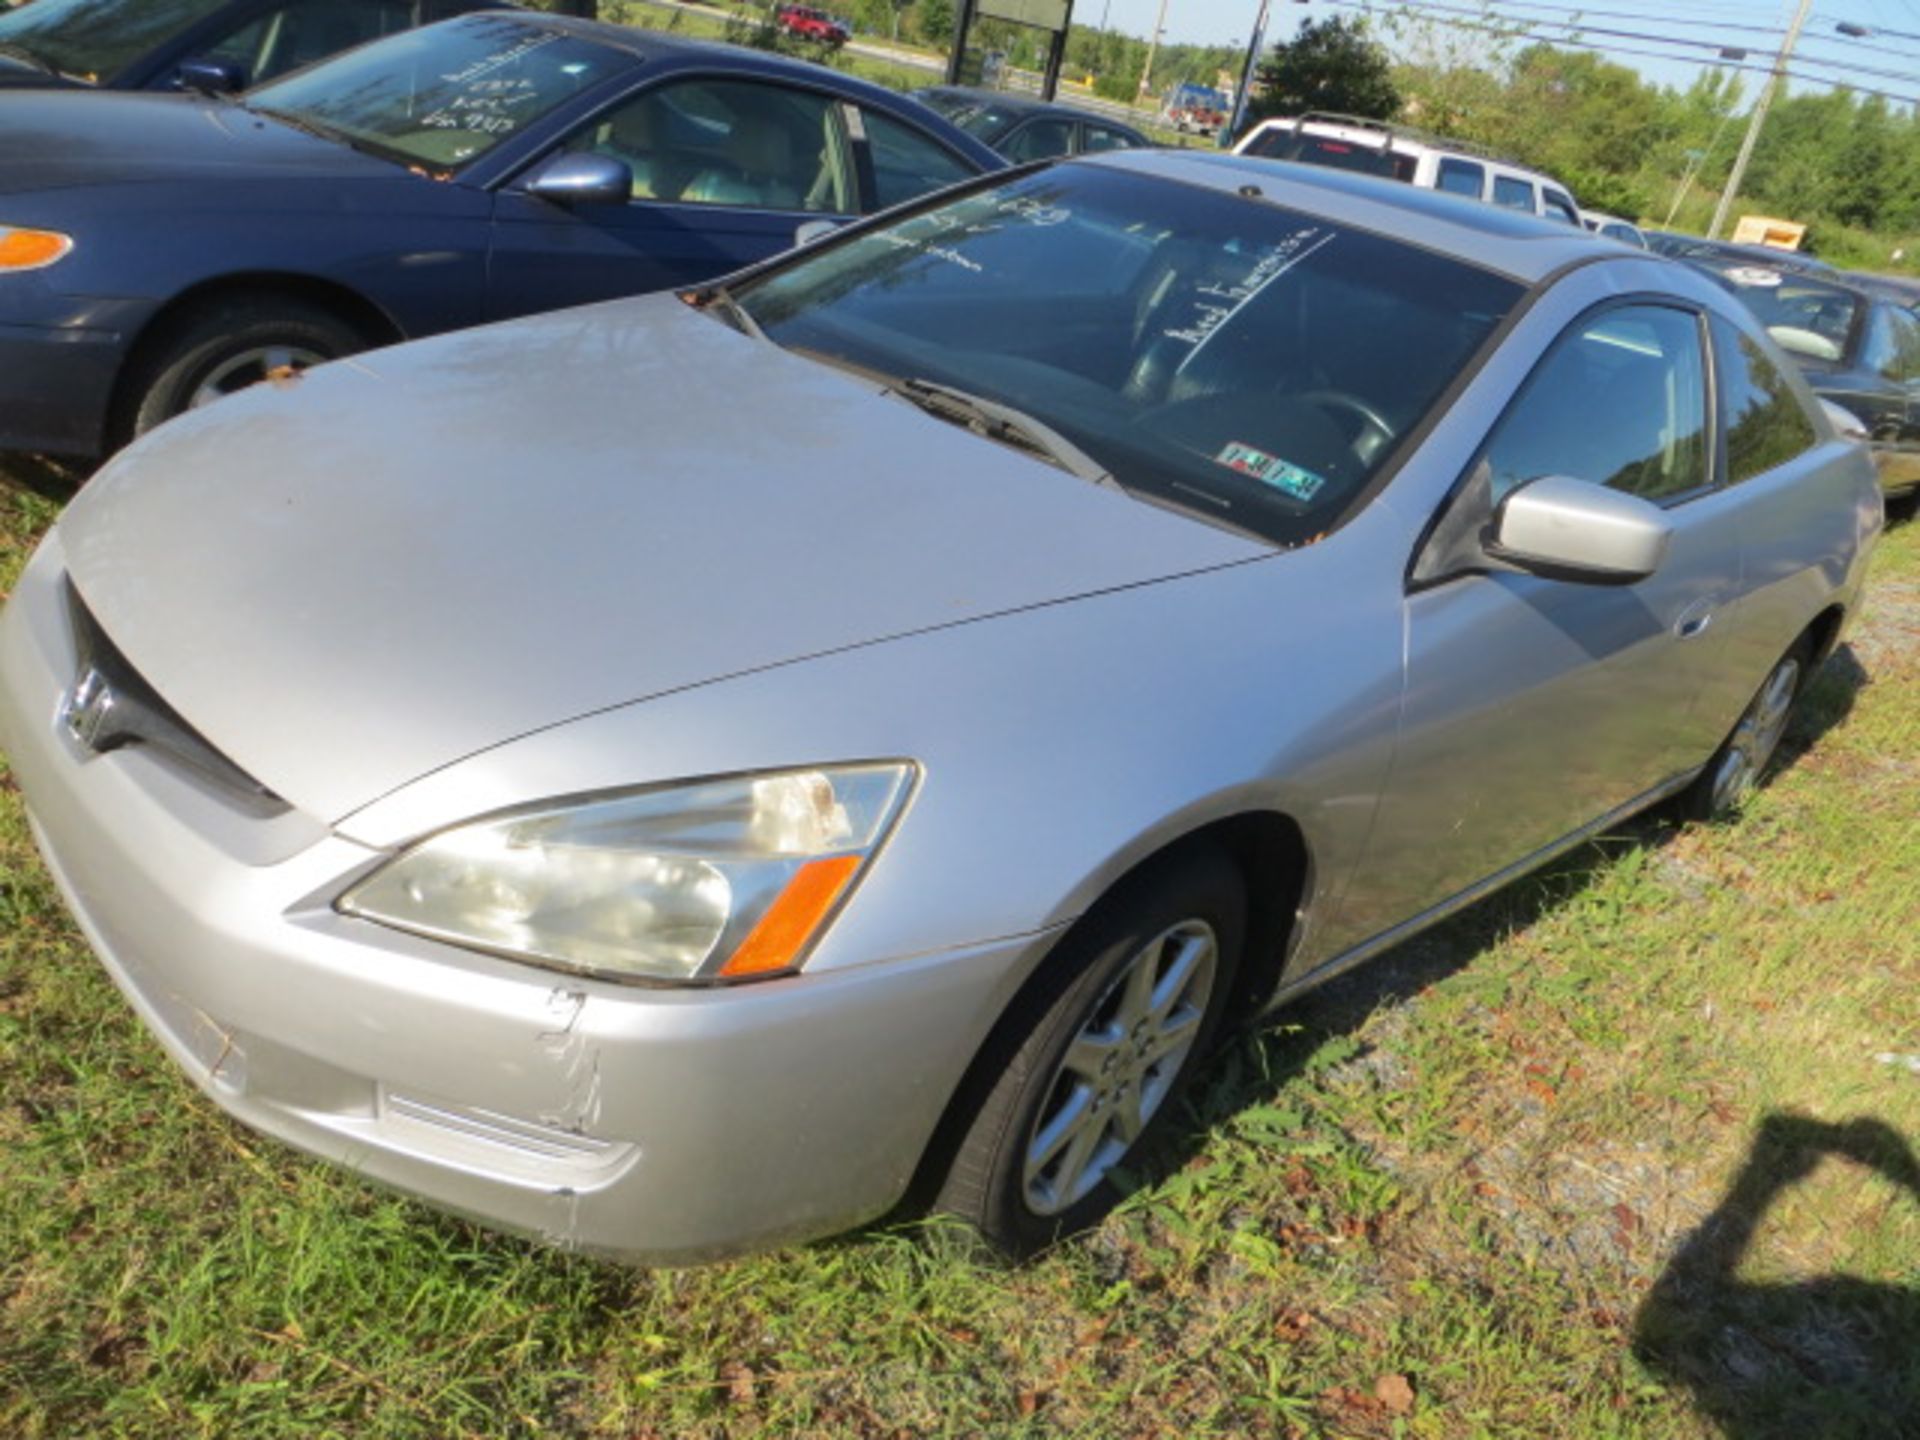 2003 Honda Accord-NEEDS TRANSMISSION UKNOWN MILES,VIN 1HGCM82663A016768, SOLD WITH GOOD TRANSFER - Image 2 of 3